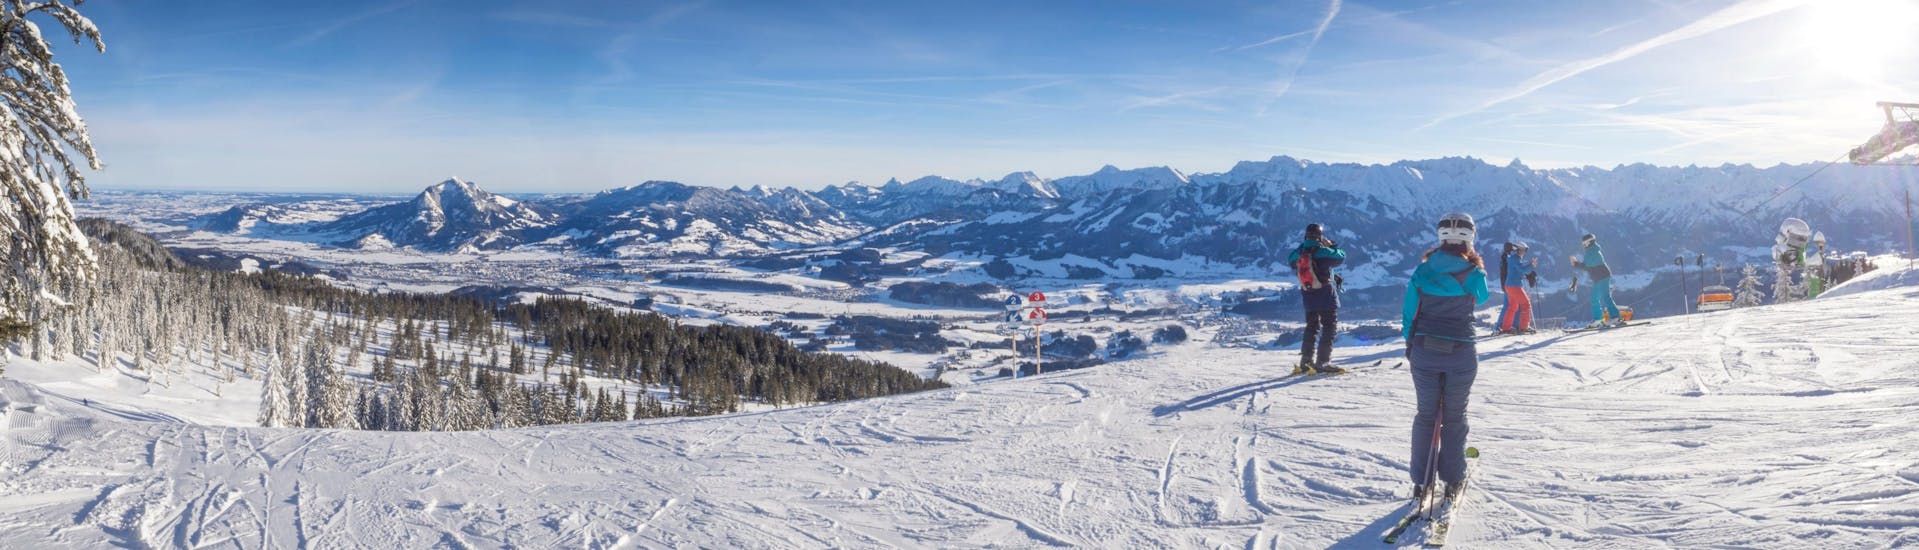 Panoramic view of the slopes of Bolsterlang in Bavaria, where local ski schools offer their ski lessons.